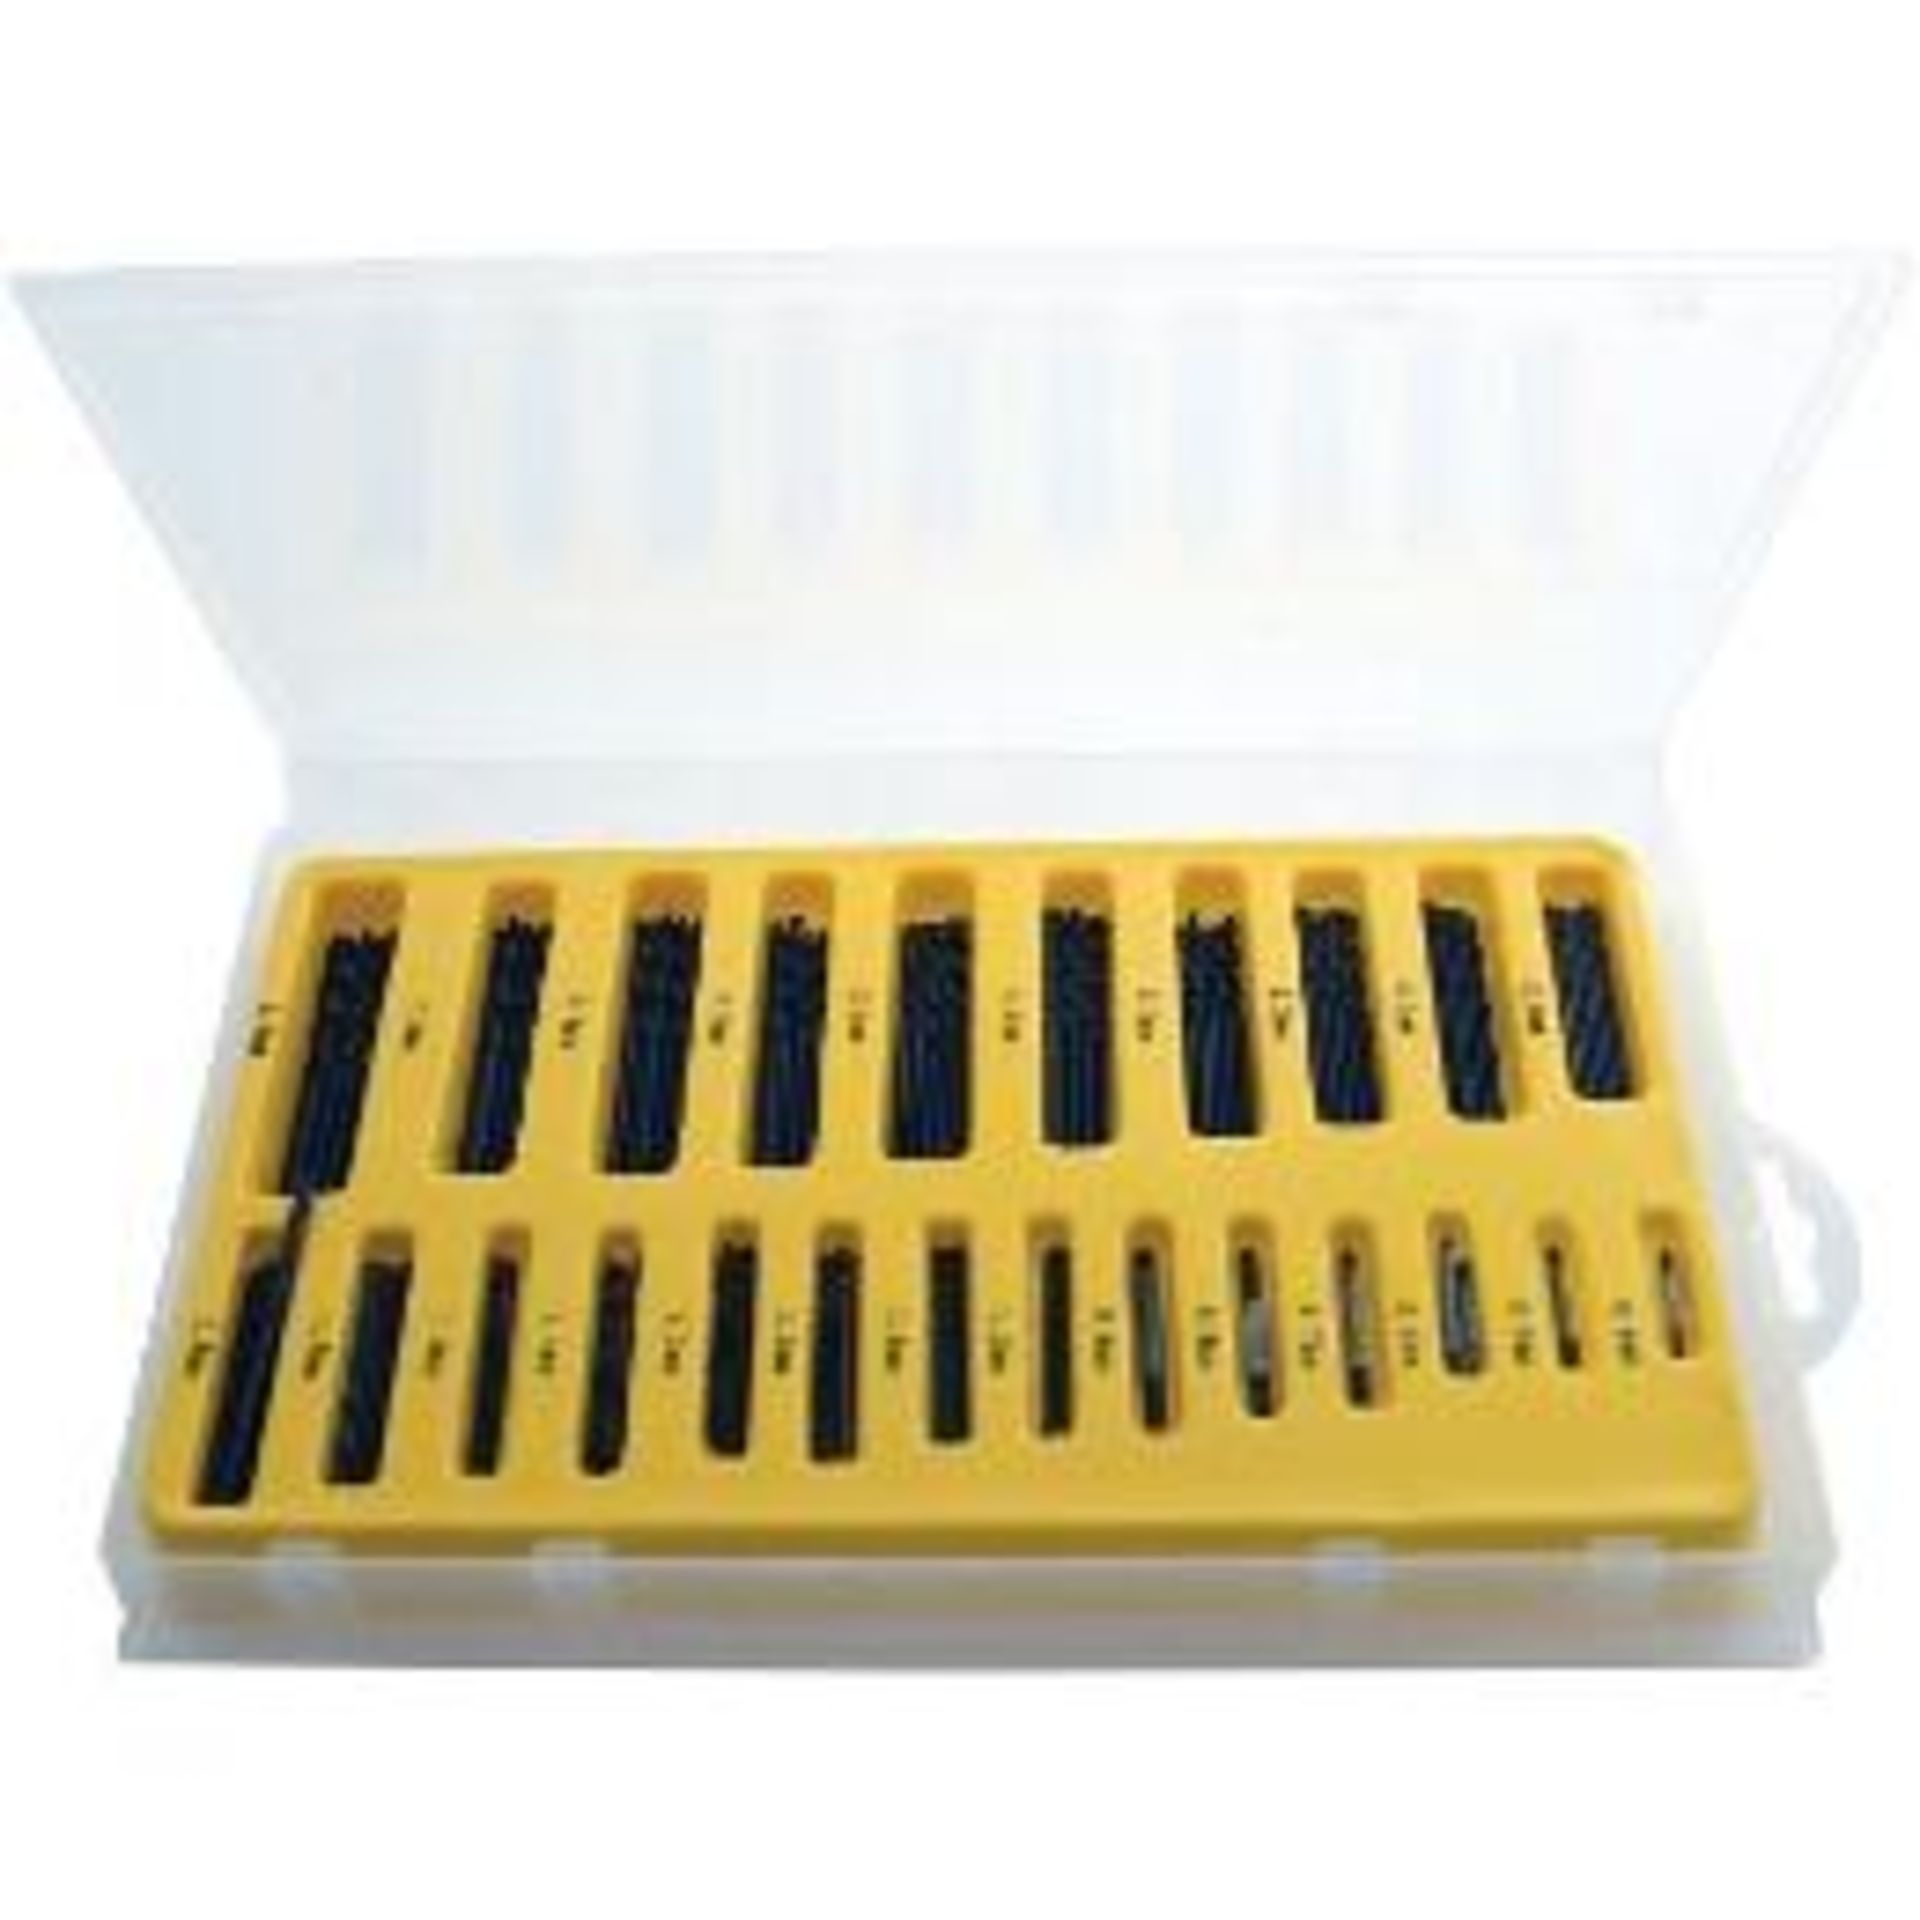 V Brand New 150 Piece Assorted Drill Bit Set - Sizes Ranging From 0.4mm to 3.2mm X 2 YOUR BID